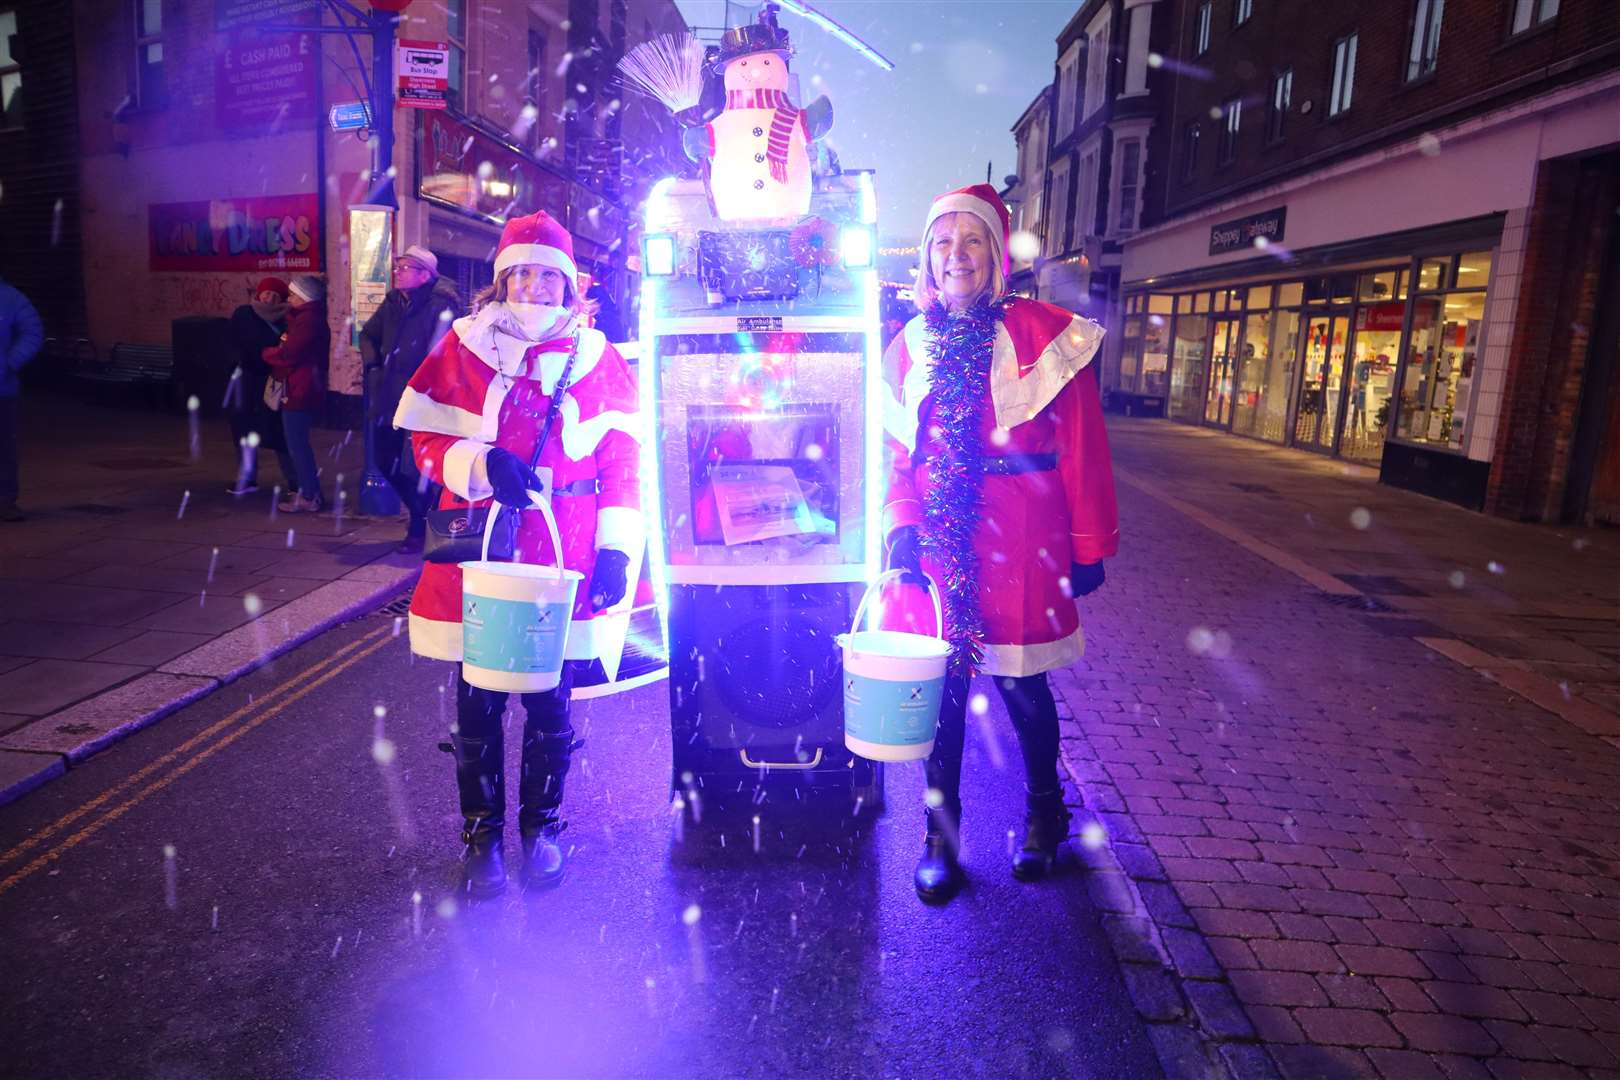 Tim Bell's snow-spewing musical illuminated helicopter and his two Santa helpers proved a big hit with the crowd